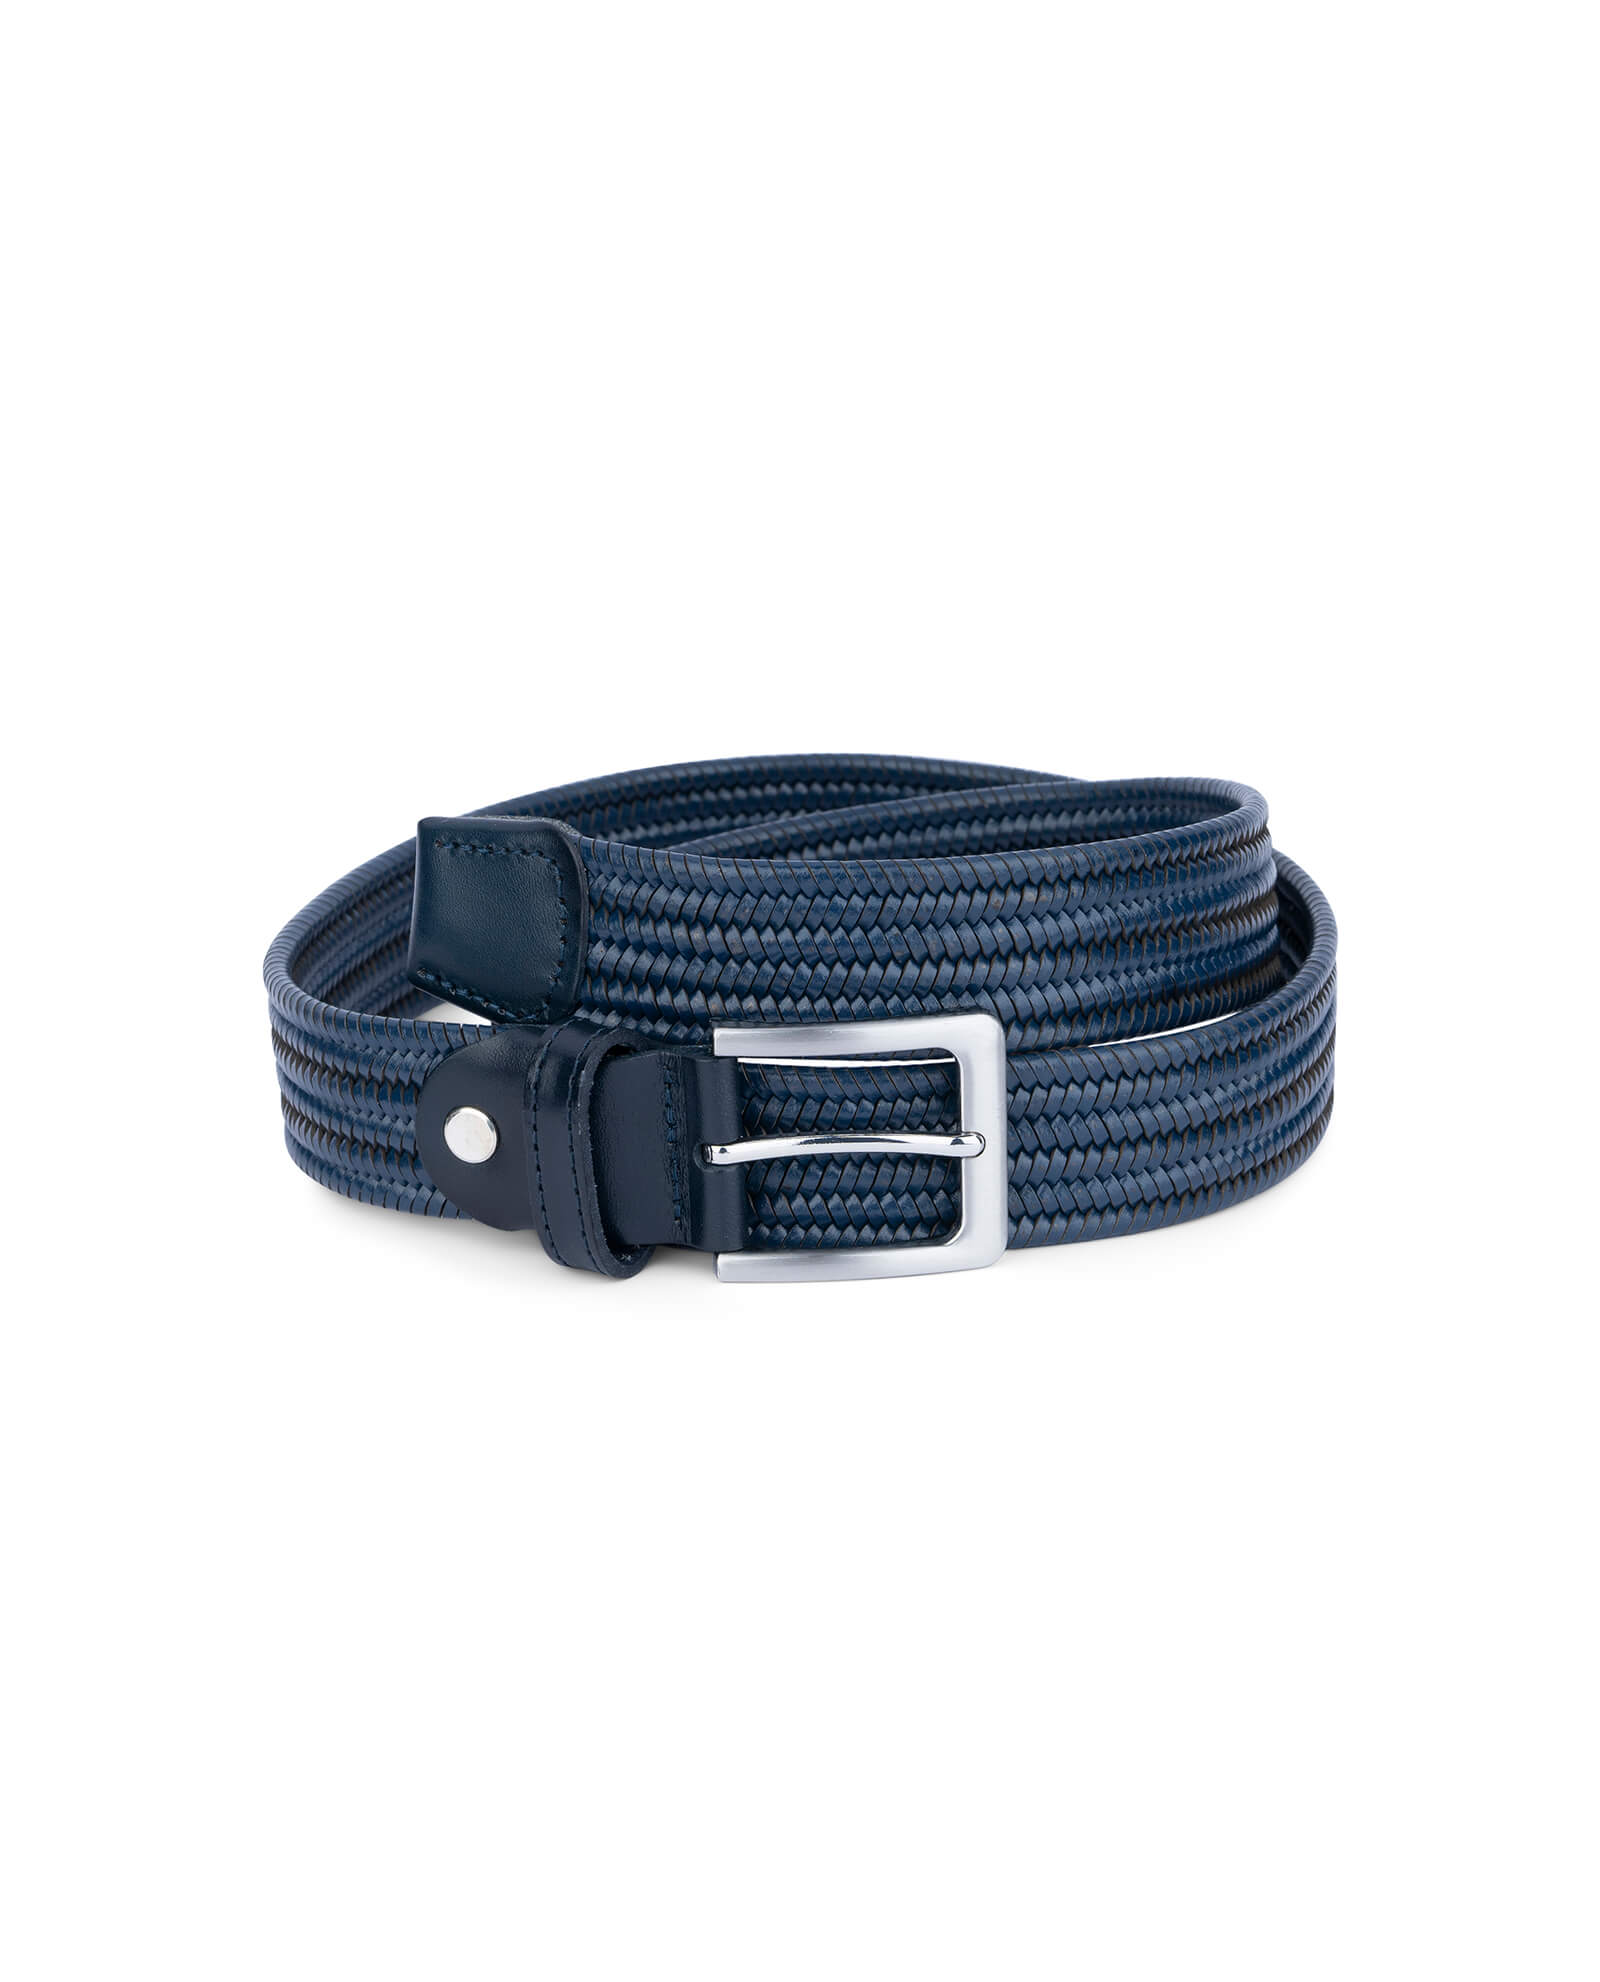 Larsson & Co Braided Stretch Belt Navy Blue Men's Size M or L New Nwt 